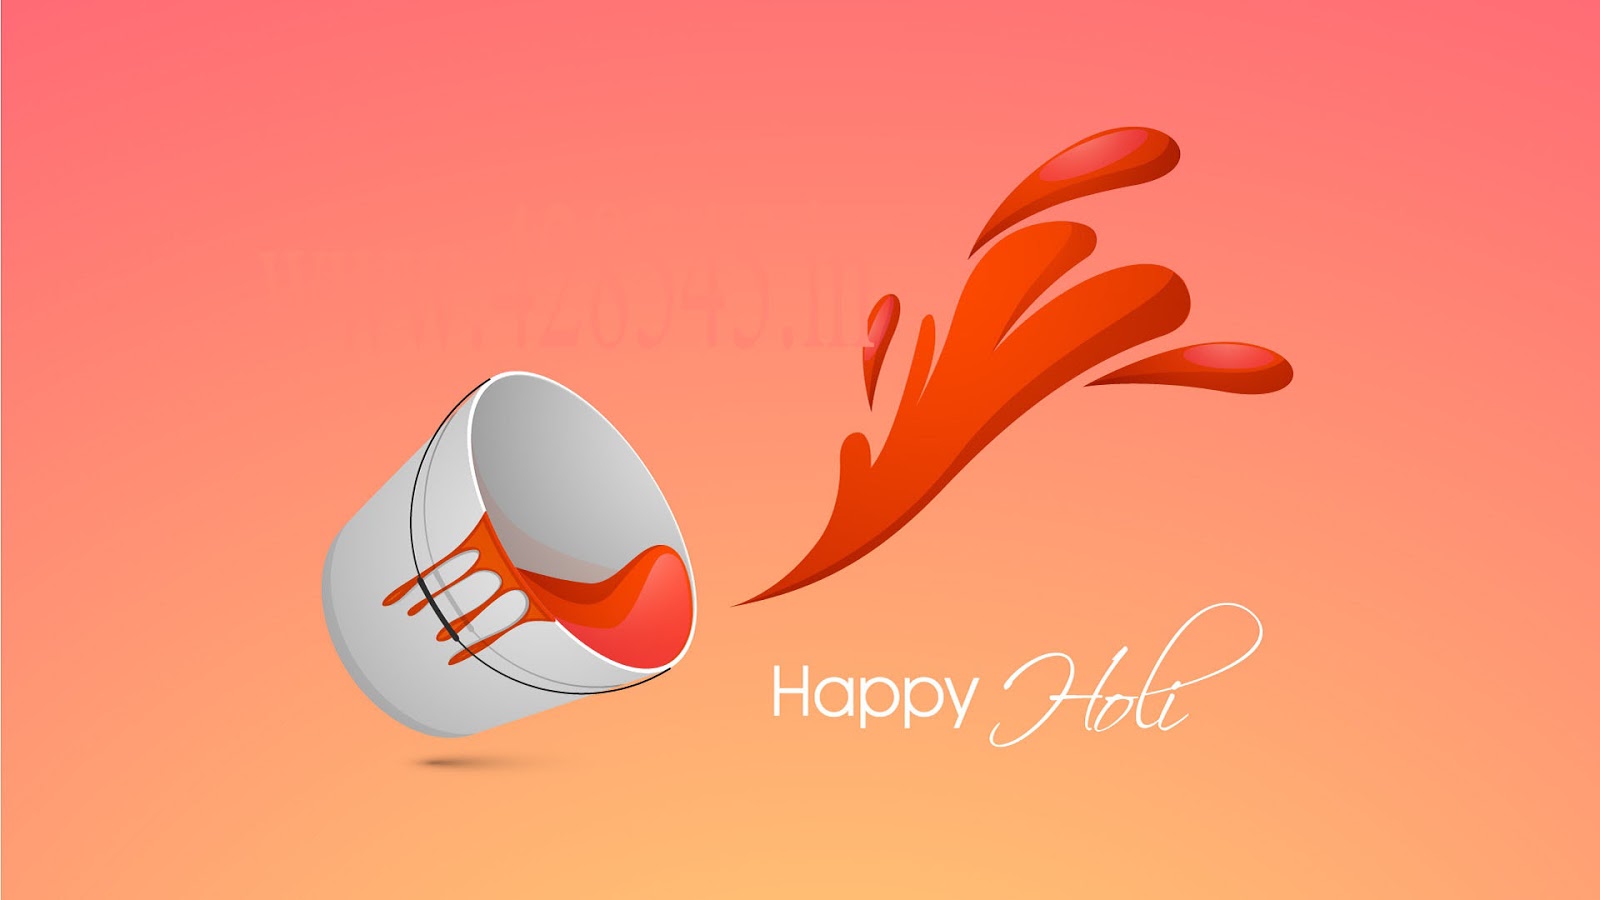 Download Happy Holi Wallpapers For Mobile Wallpaper  Wallpaperscom